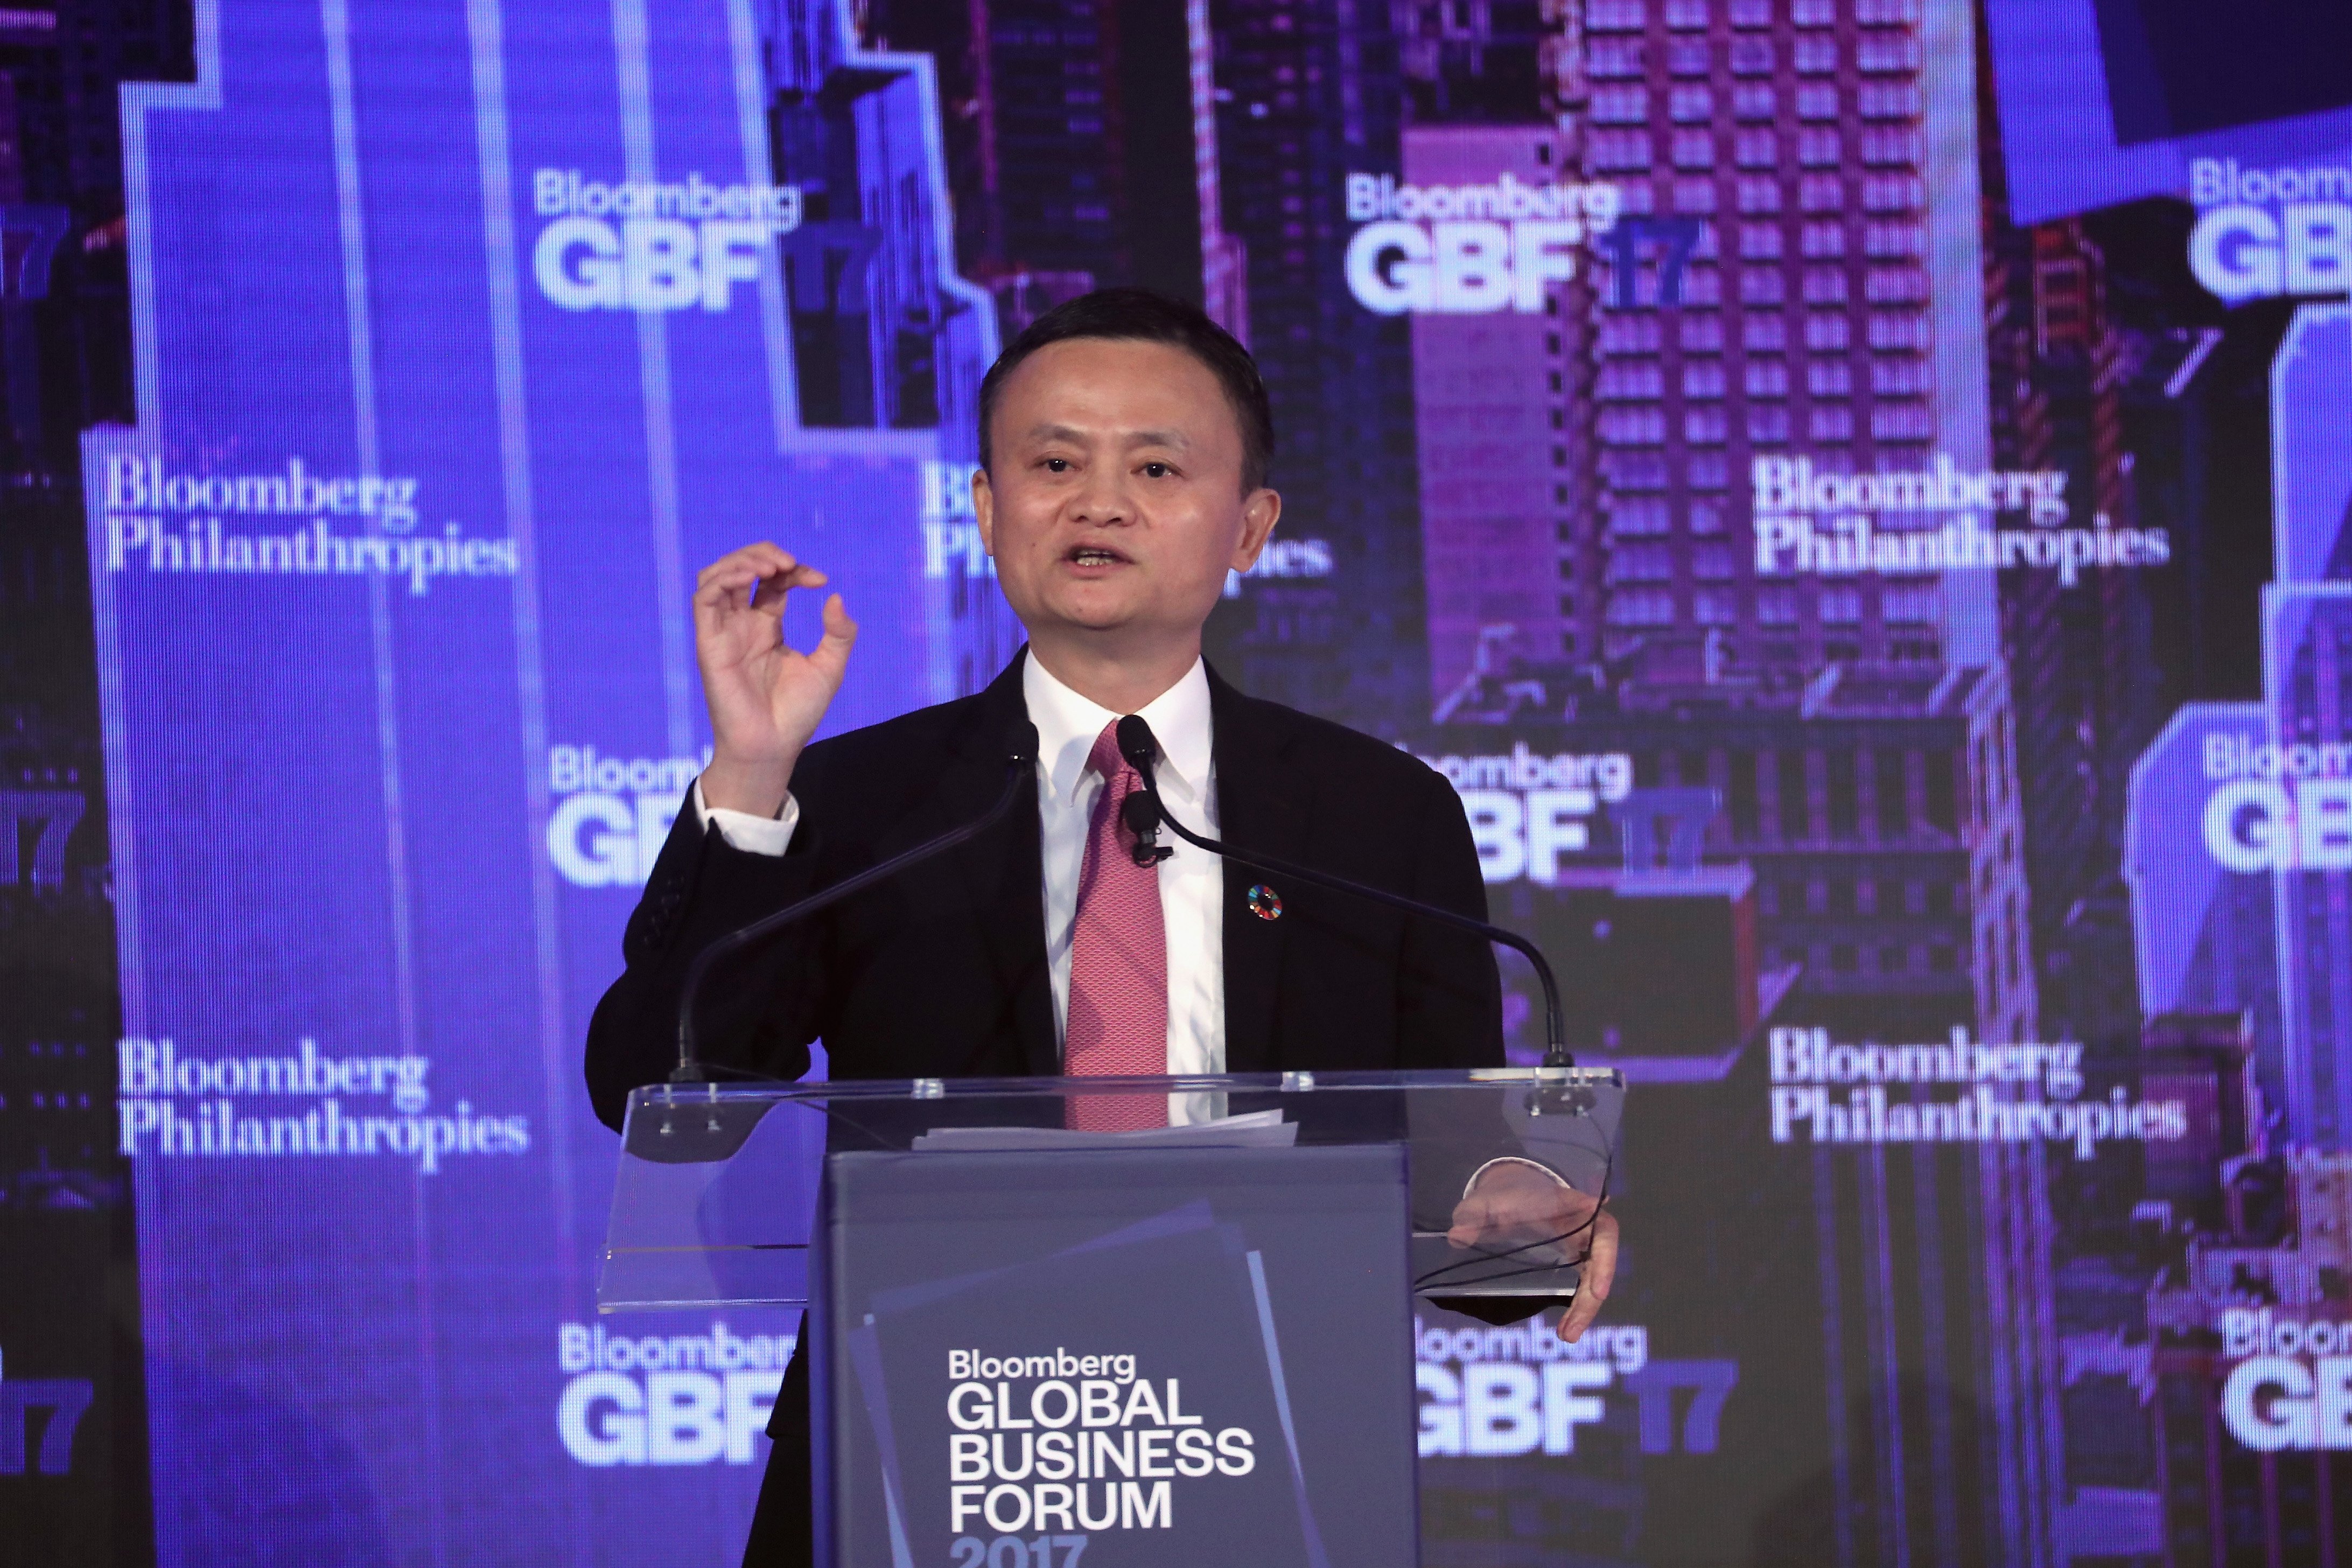 Jack Ma delivering a speech at the Bloomberg Global Business Forum in New York City | Photo: Getty Images